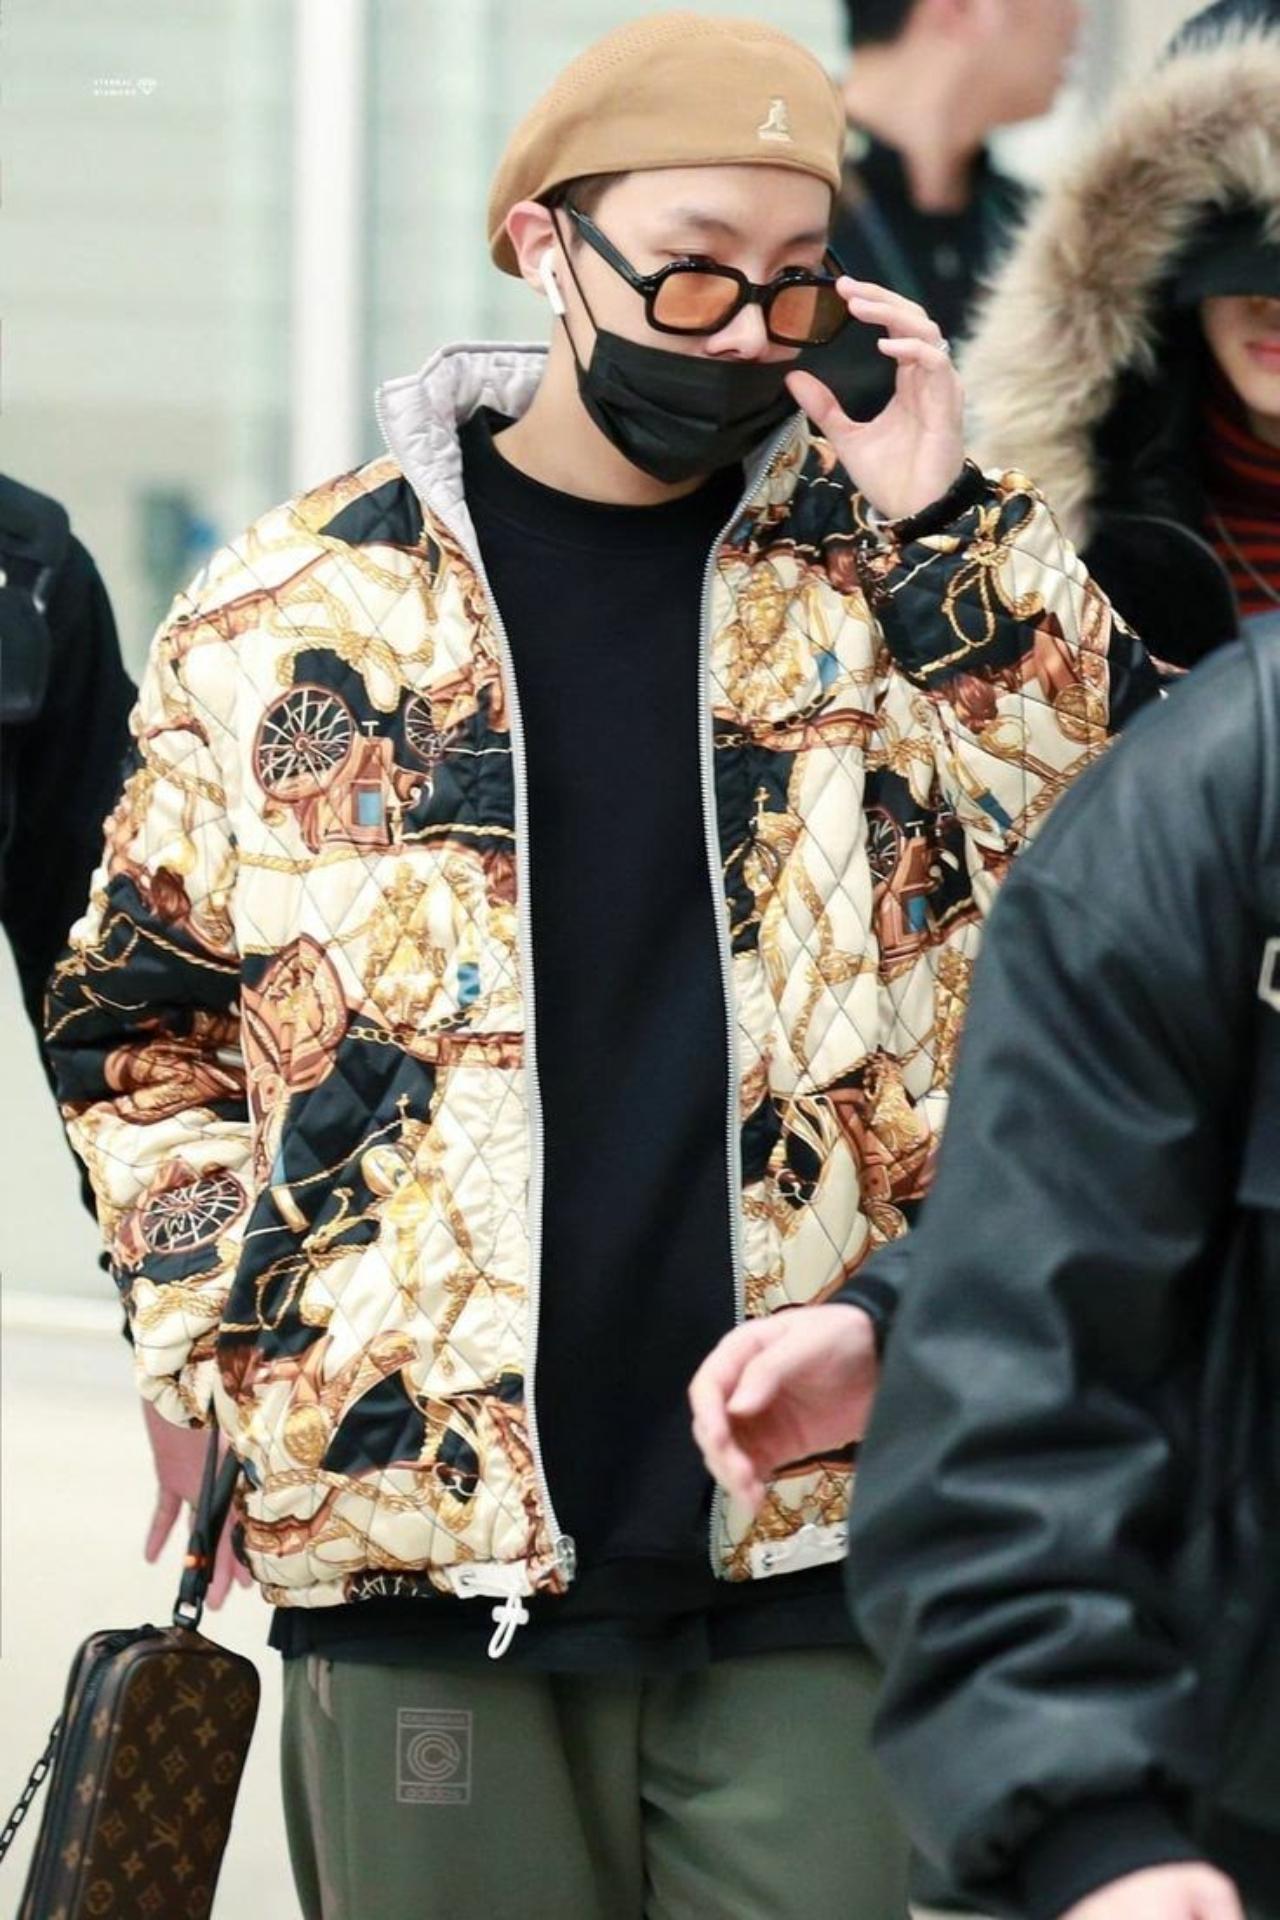 J-Hope and extravagance go hand in hand. The artist is known to pull off some extremely unconventional and flashy fashion choices. If not styled well, this bomber jacket could have come off as bulky but it looks perfect on lithe Hobi